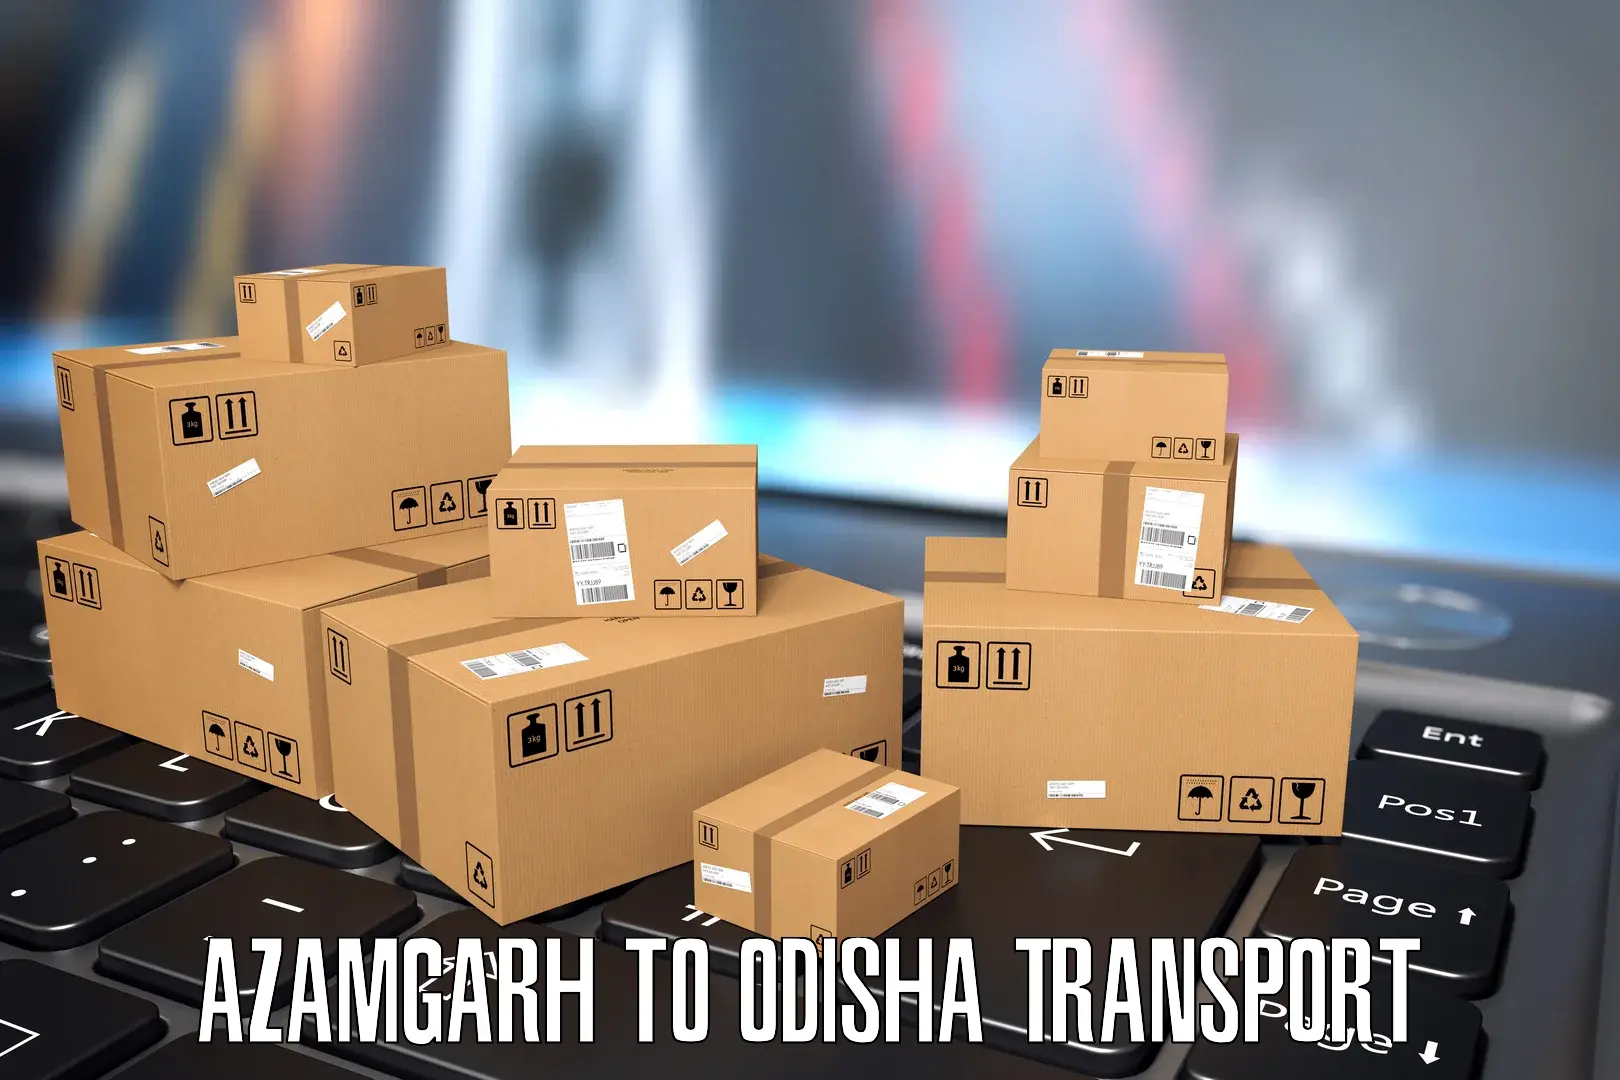 Container transport service Azamgarh to Anandapur